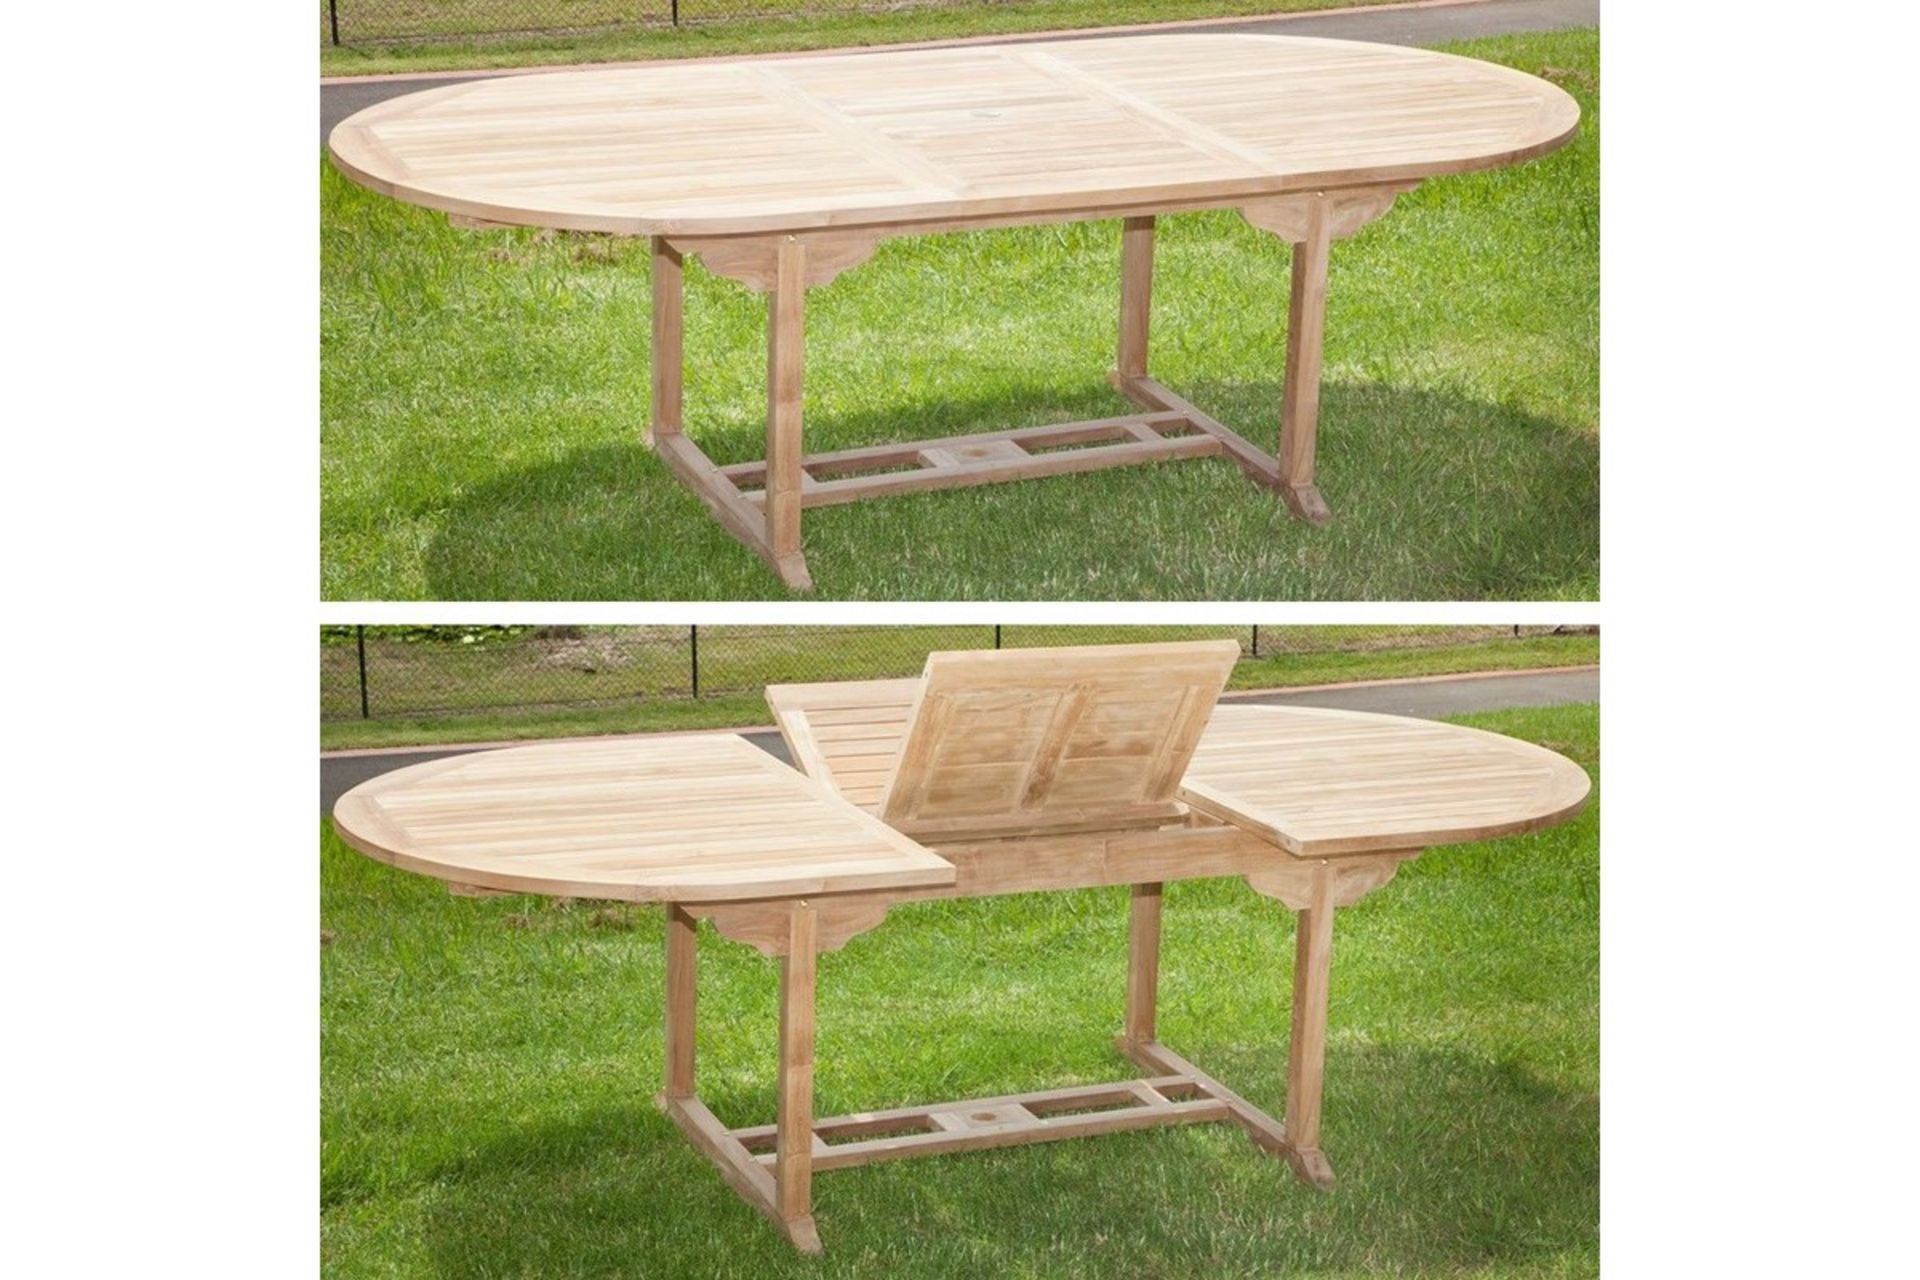 V Brand New Teak Extended Oval Table Set Allows For Up To 8 People including 8 stacking chairs and 8 - Image 2 of 2